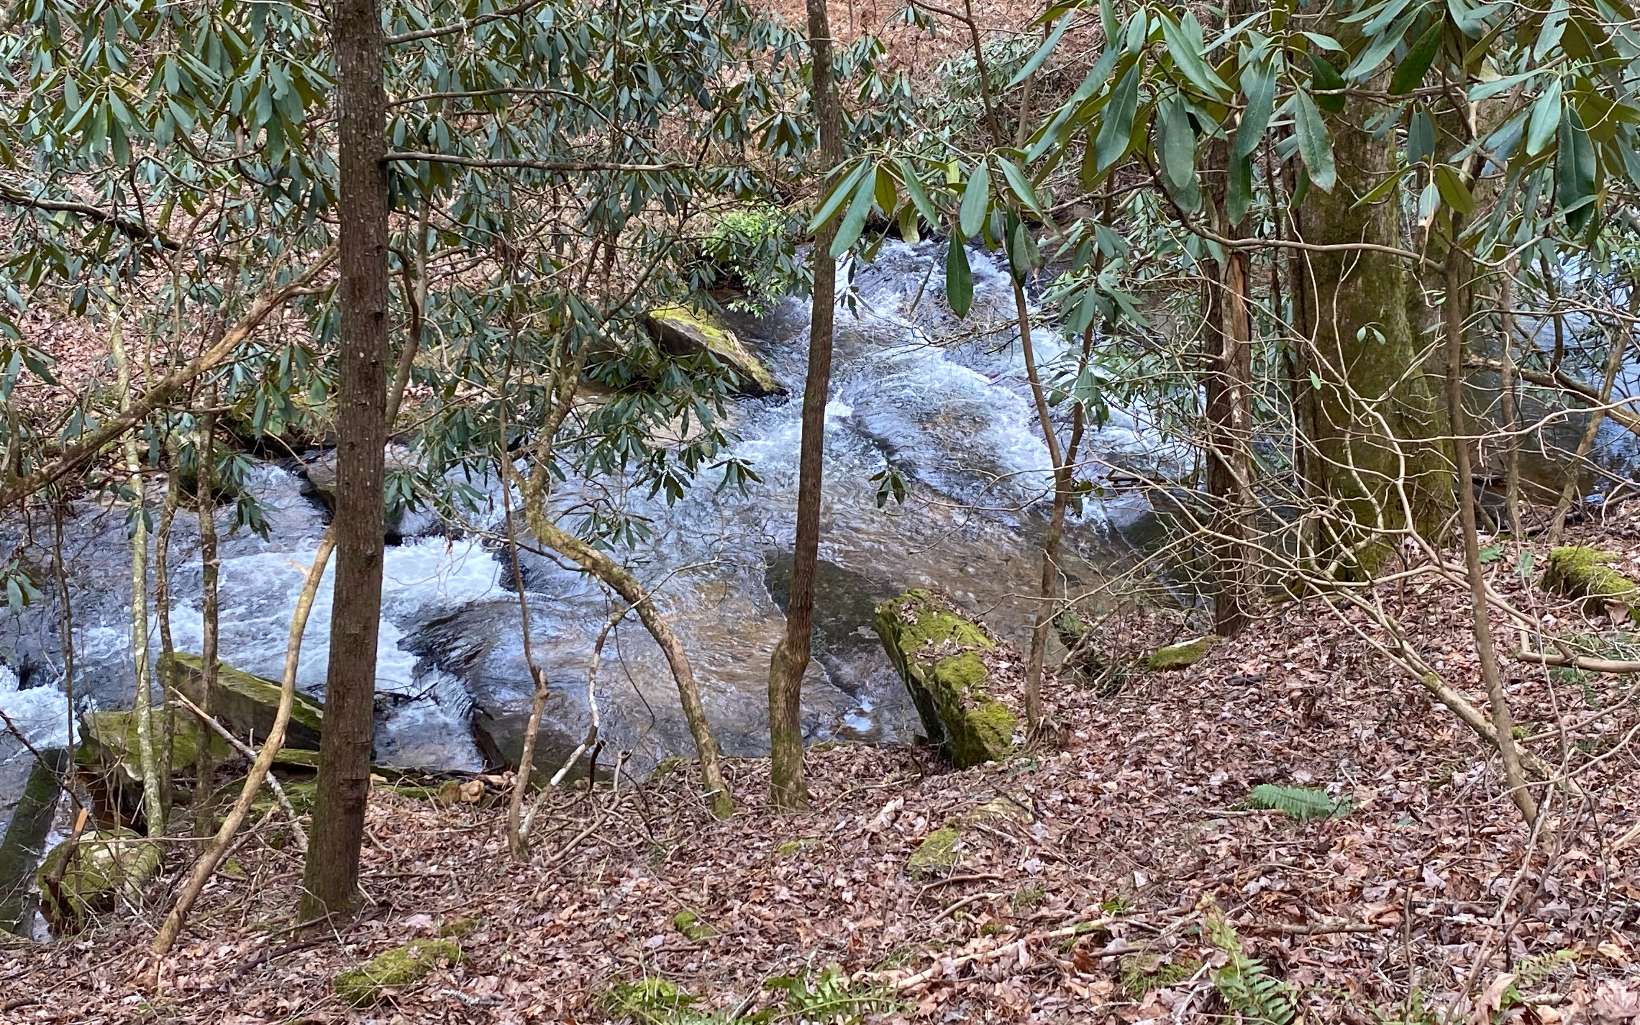 Have the best of what North Georgia living has to offer! This 3.32 acre lot has a great building spot as well as creek frontage with a small waterfall cascading over the rocks! Lots of water noise and views from this lot! You are just a short walk away from access to over 20,000 acres of National Forest. Perfect building spot situated to have the sounds of the creek from your front porch provides a relaxing and soothing atmosphere. Easily have two driveways either from front of lot or from back of lot. Mature hardwoods all over the property and native Mountain Laurel throughout. Views of the mountains that are the southern mountain range for the Tennessee Valley Water Shed. Also view of the Georgia/Tennessee lines! Lot shares a well with 4 other homes/lots making water expense very minimal. Wineries, apple orchards, eateries, and more are just a short drive away! Imagine waking up every morning to the sound of a gently flowing creek and being surrounded by the majesty of the mountains at this peaceful retreat from the hustle and bustle of daily life. Seller will consider owner financing.